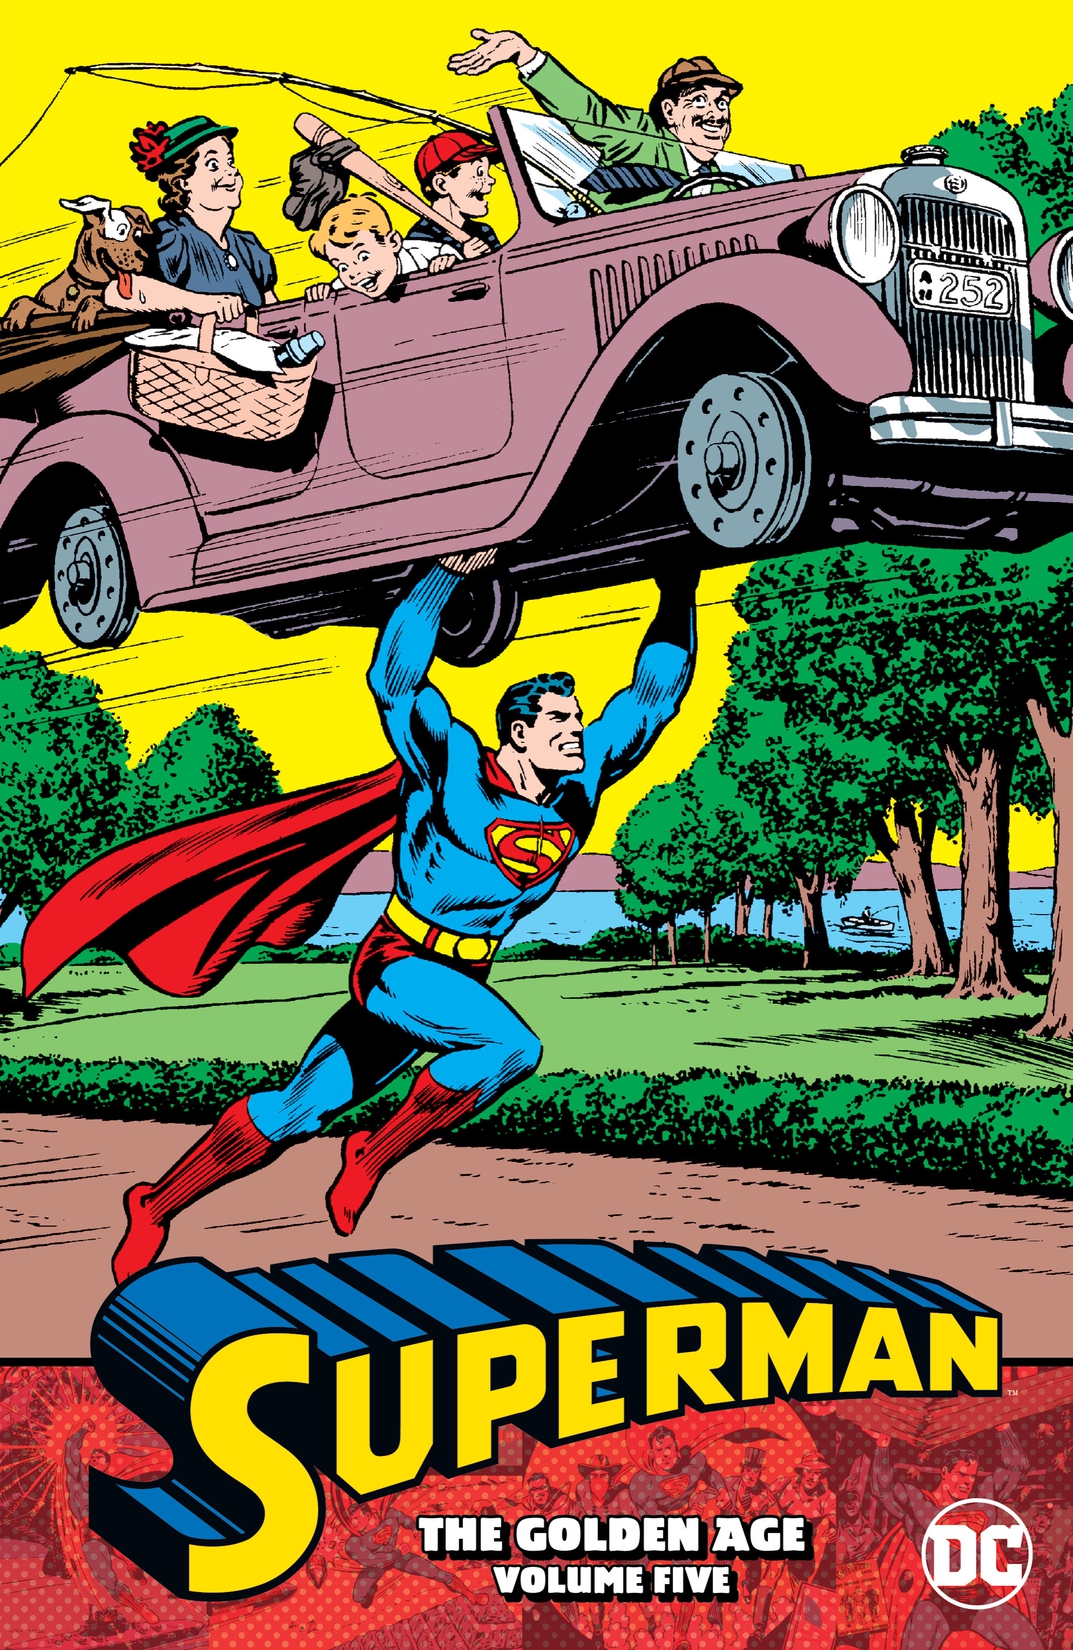 Superman: The Golden Age Vol. 5 preview images